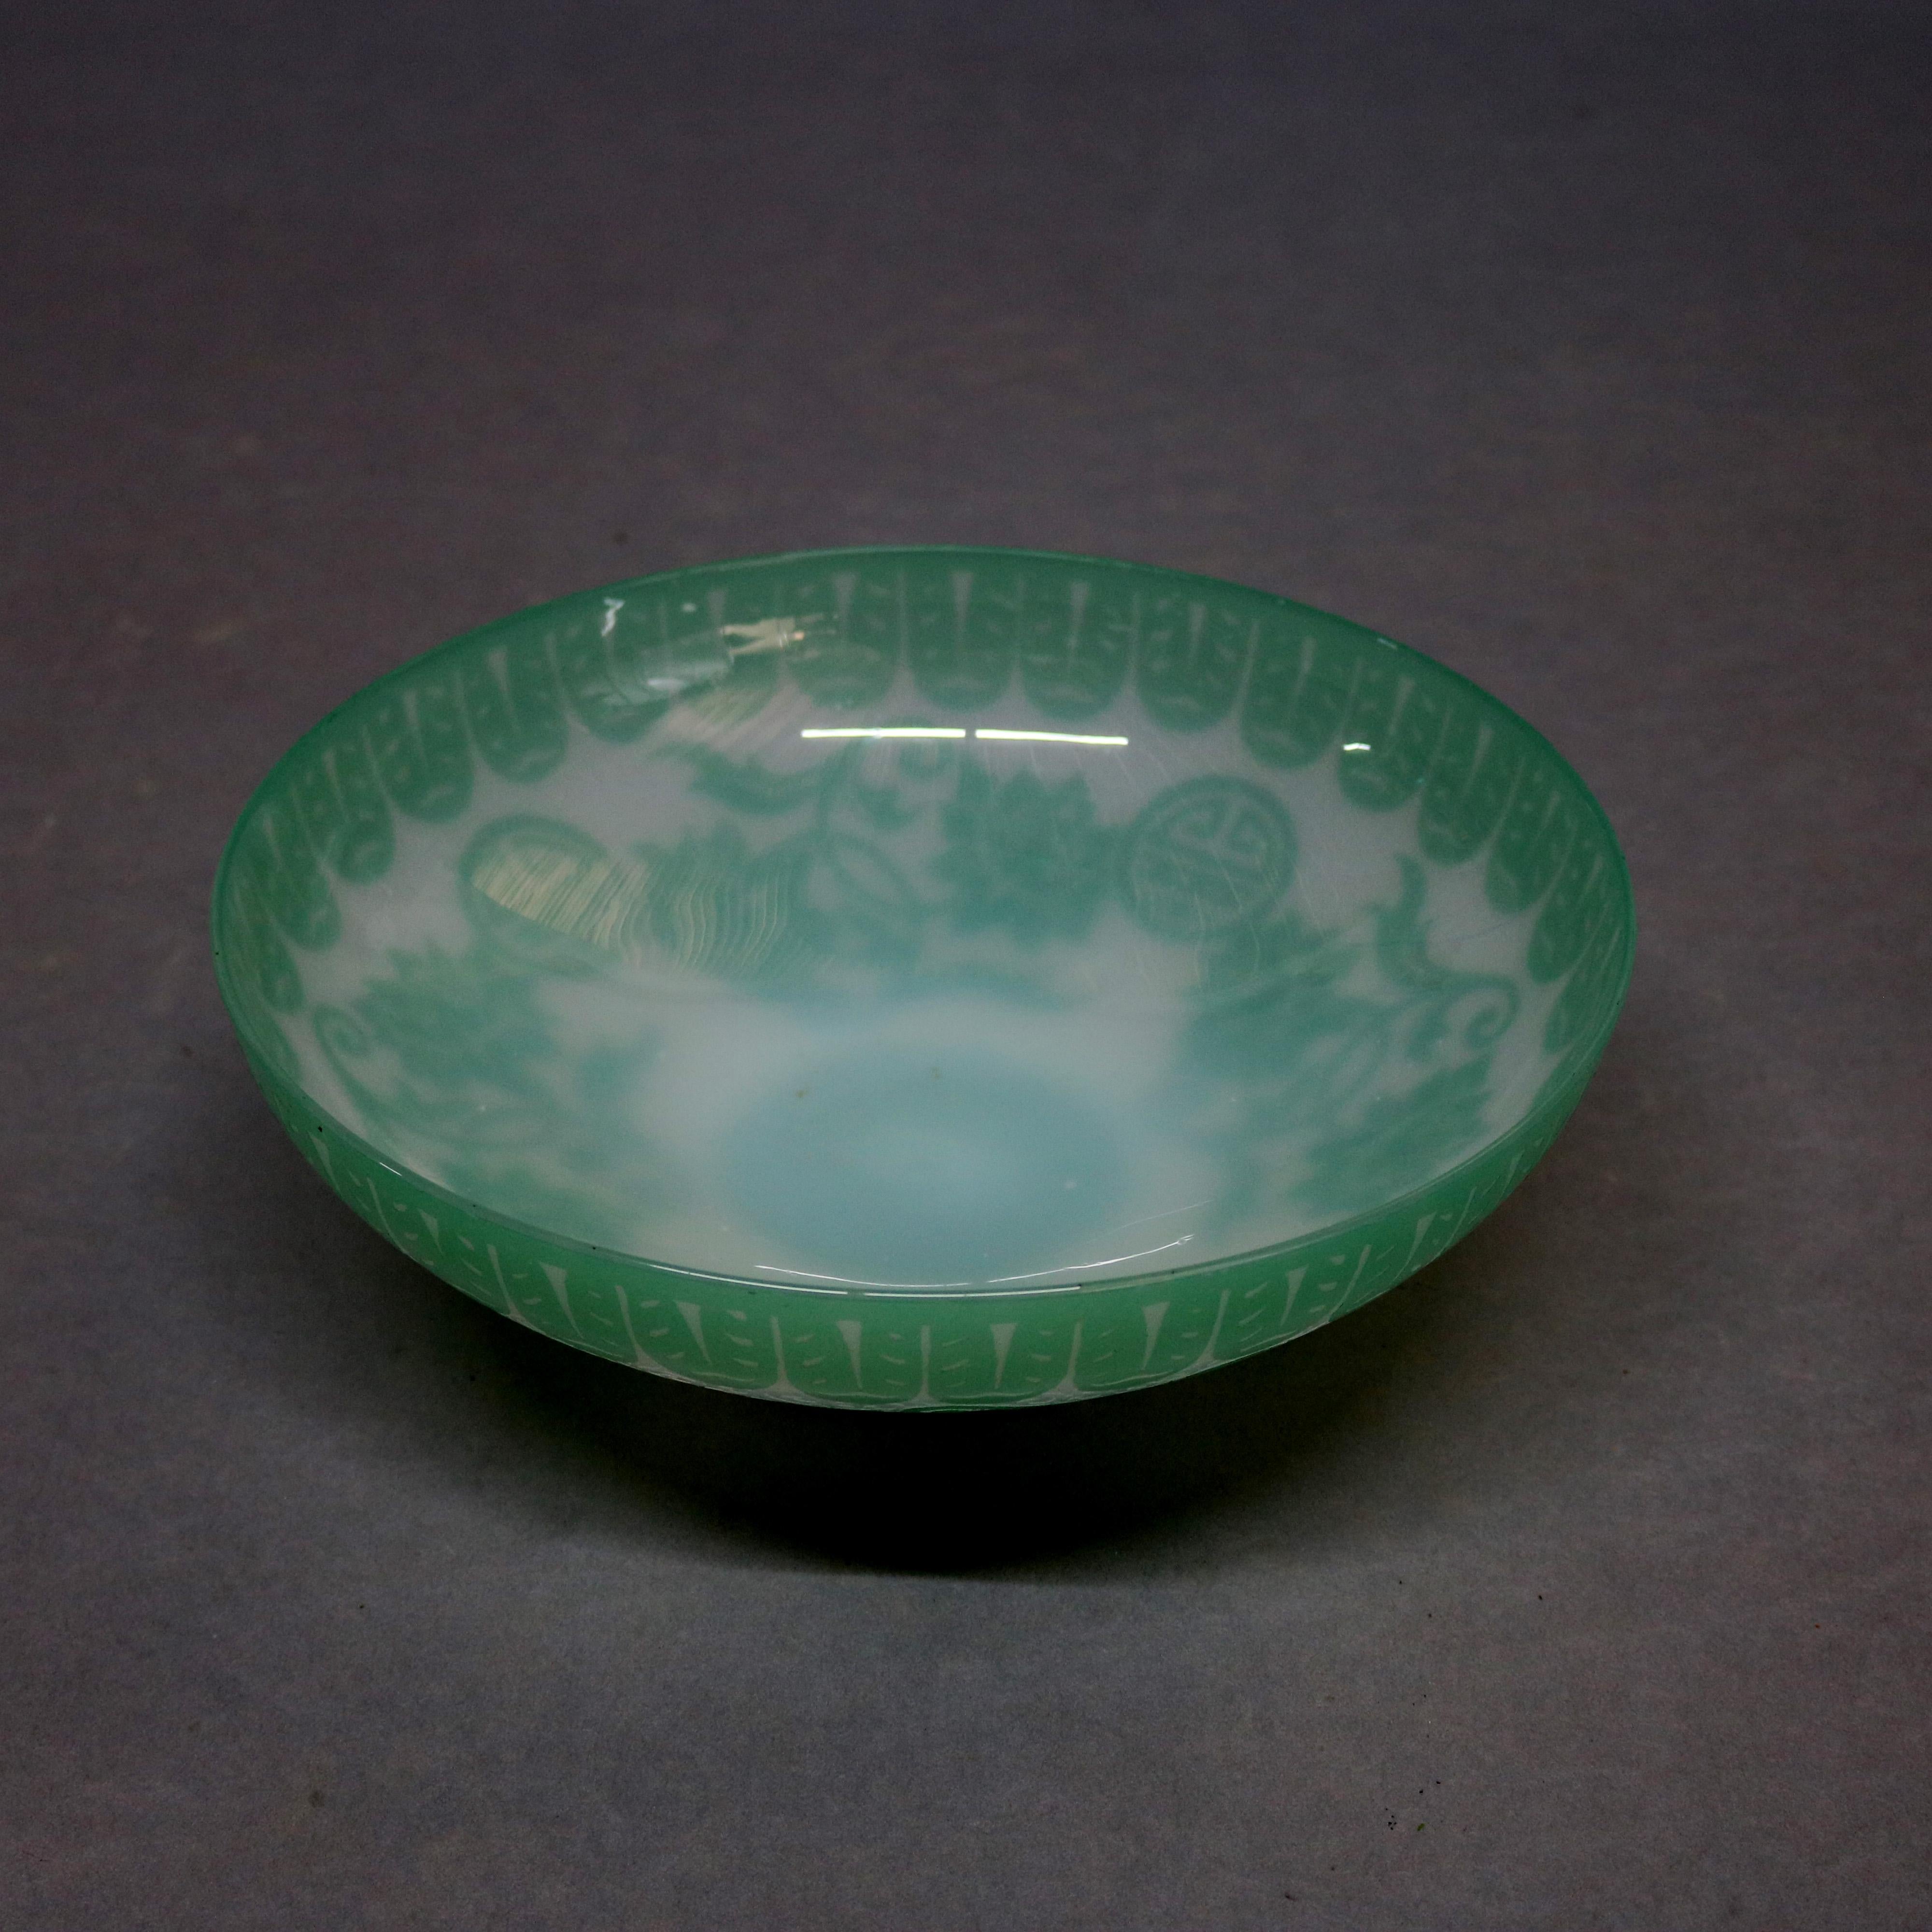 An antique early Steuben Corning Museum of Glass handcrafted jade green art glass center bowl (Shape 2852) with chinoiserie acid-cutback Chinese pattern of floral peonies and Chinese symbol for Good Luck, unsigned and guaranteed authentic, circa